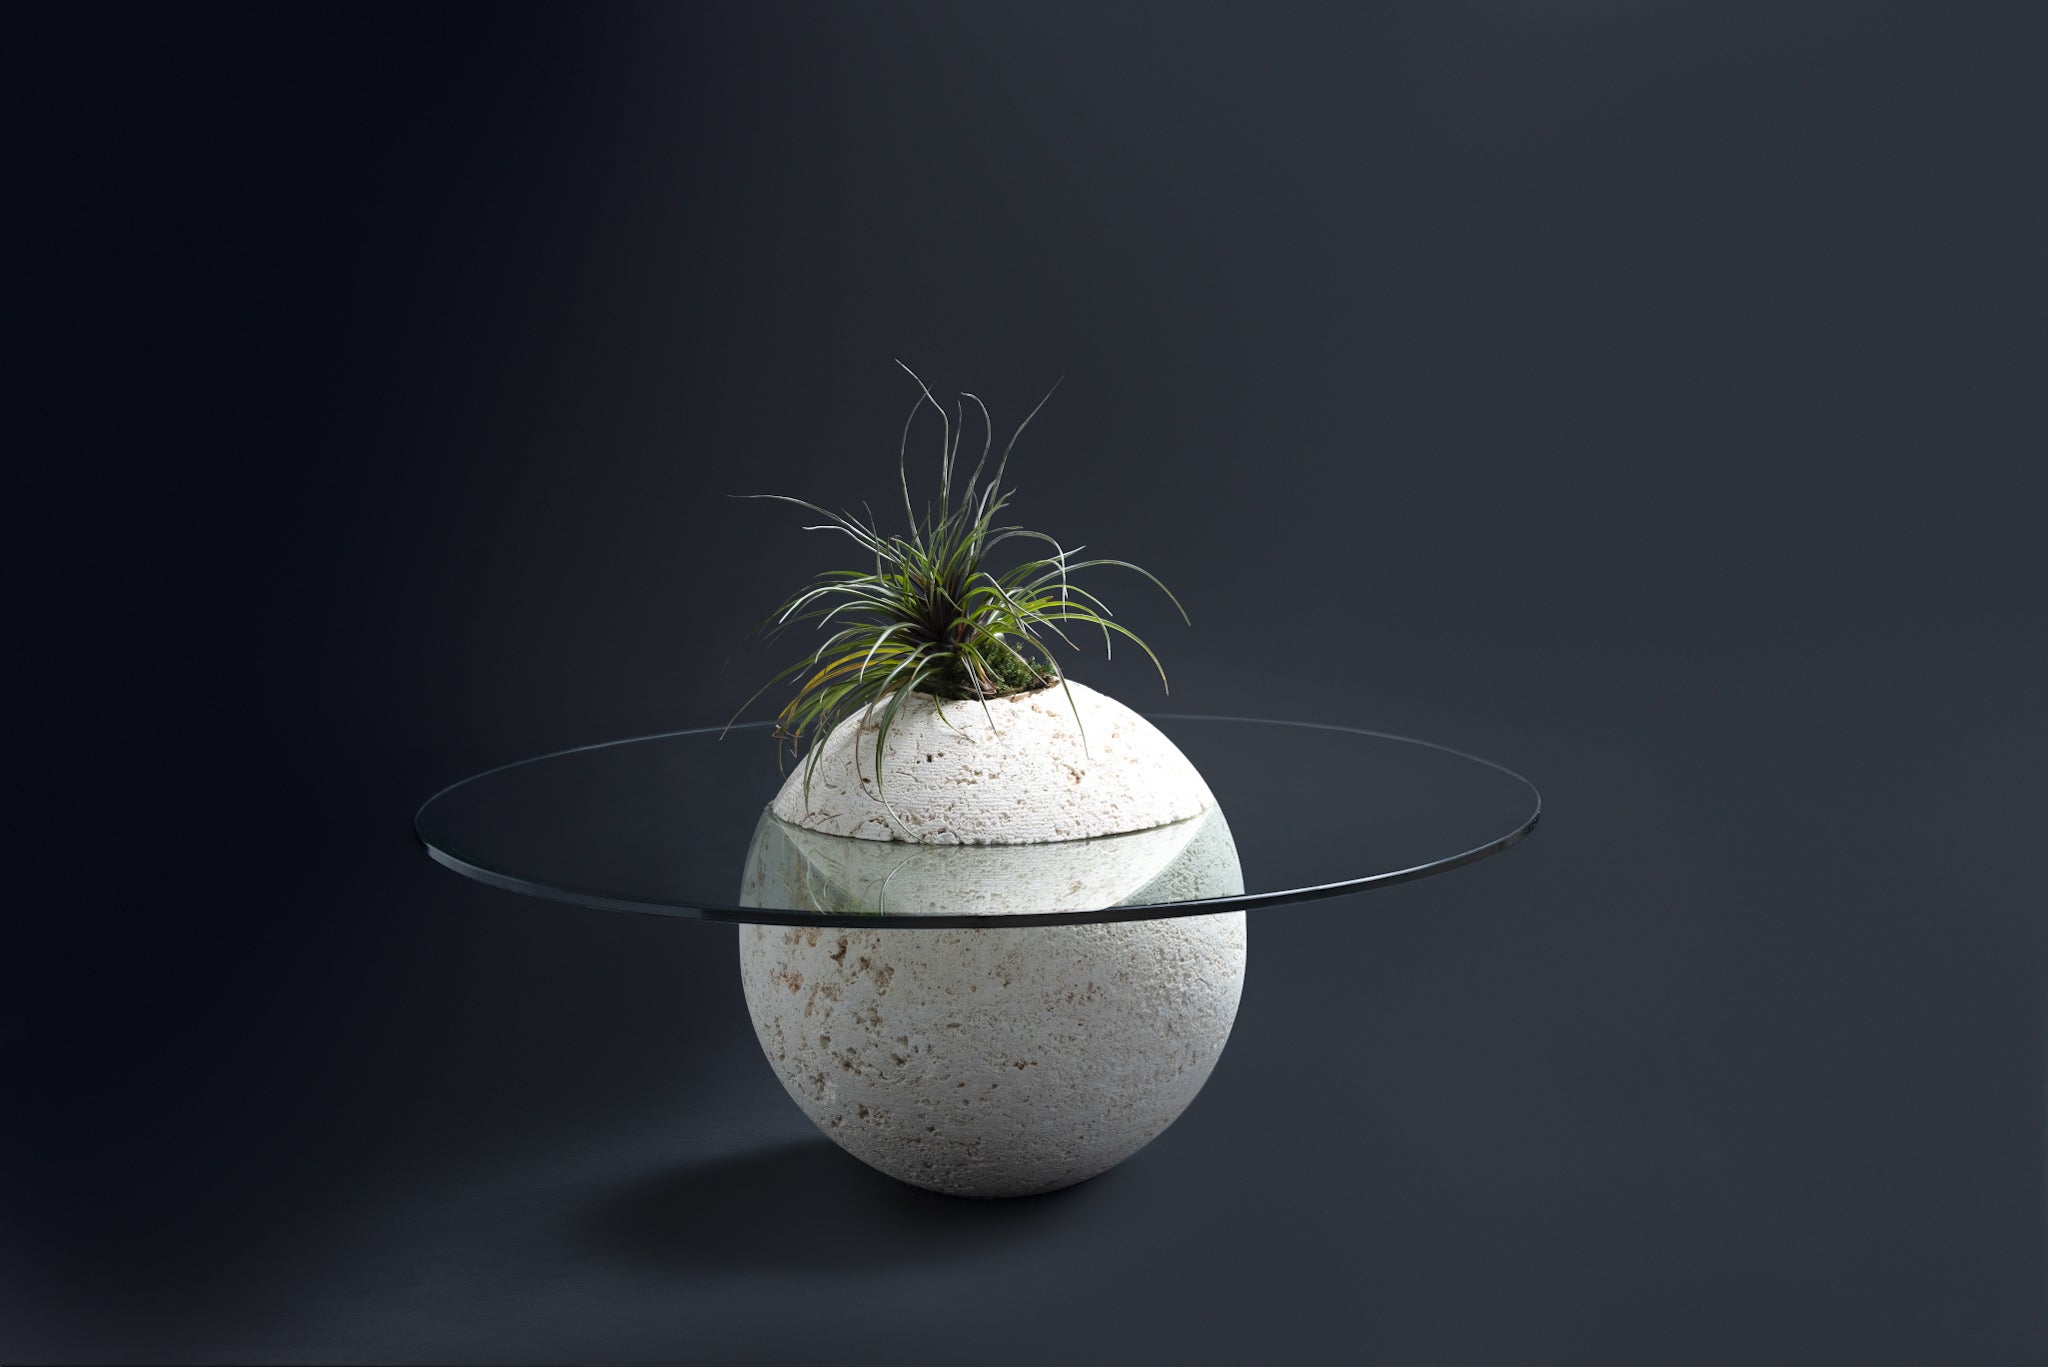 Made to order Keystone 16” Sphere with 4” planter.

Polished 36 Inch round glass table top 1/2 Inch thick tempered with Beveled Edge

Inspired by Coral Castle, an oolite limestone structure created by the Latvian-American eccentric Edward